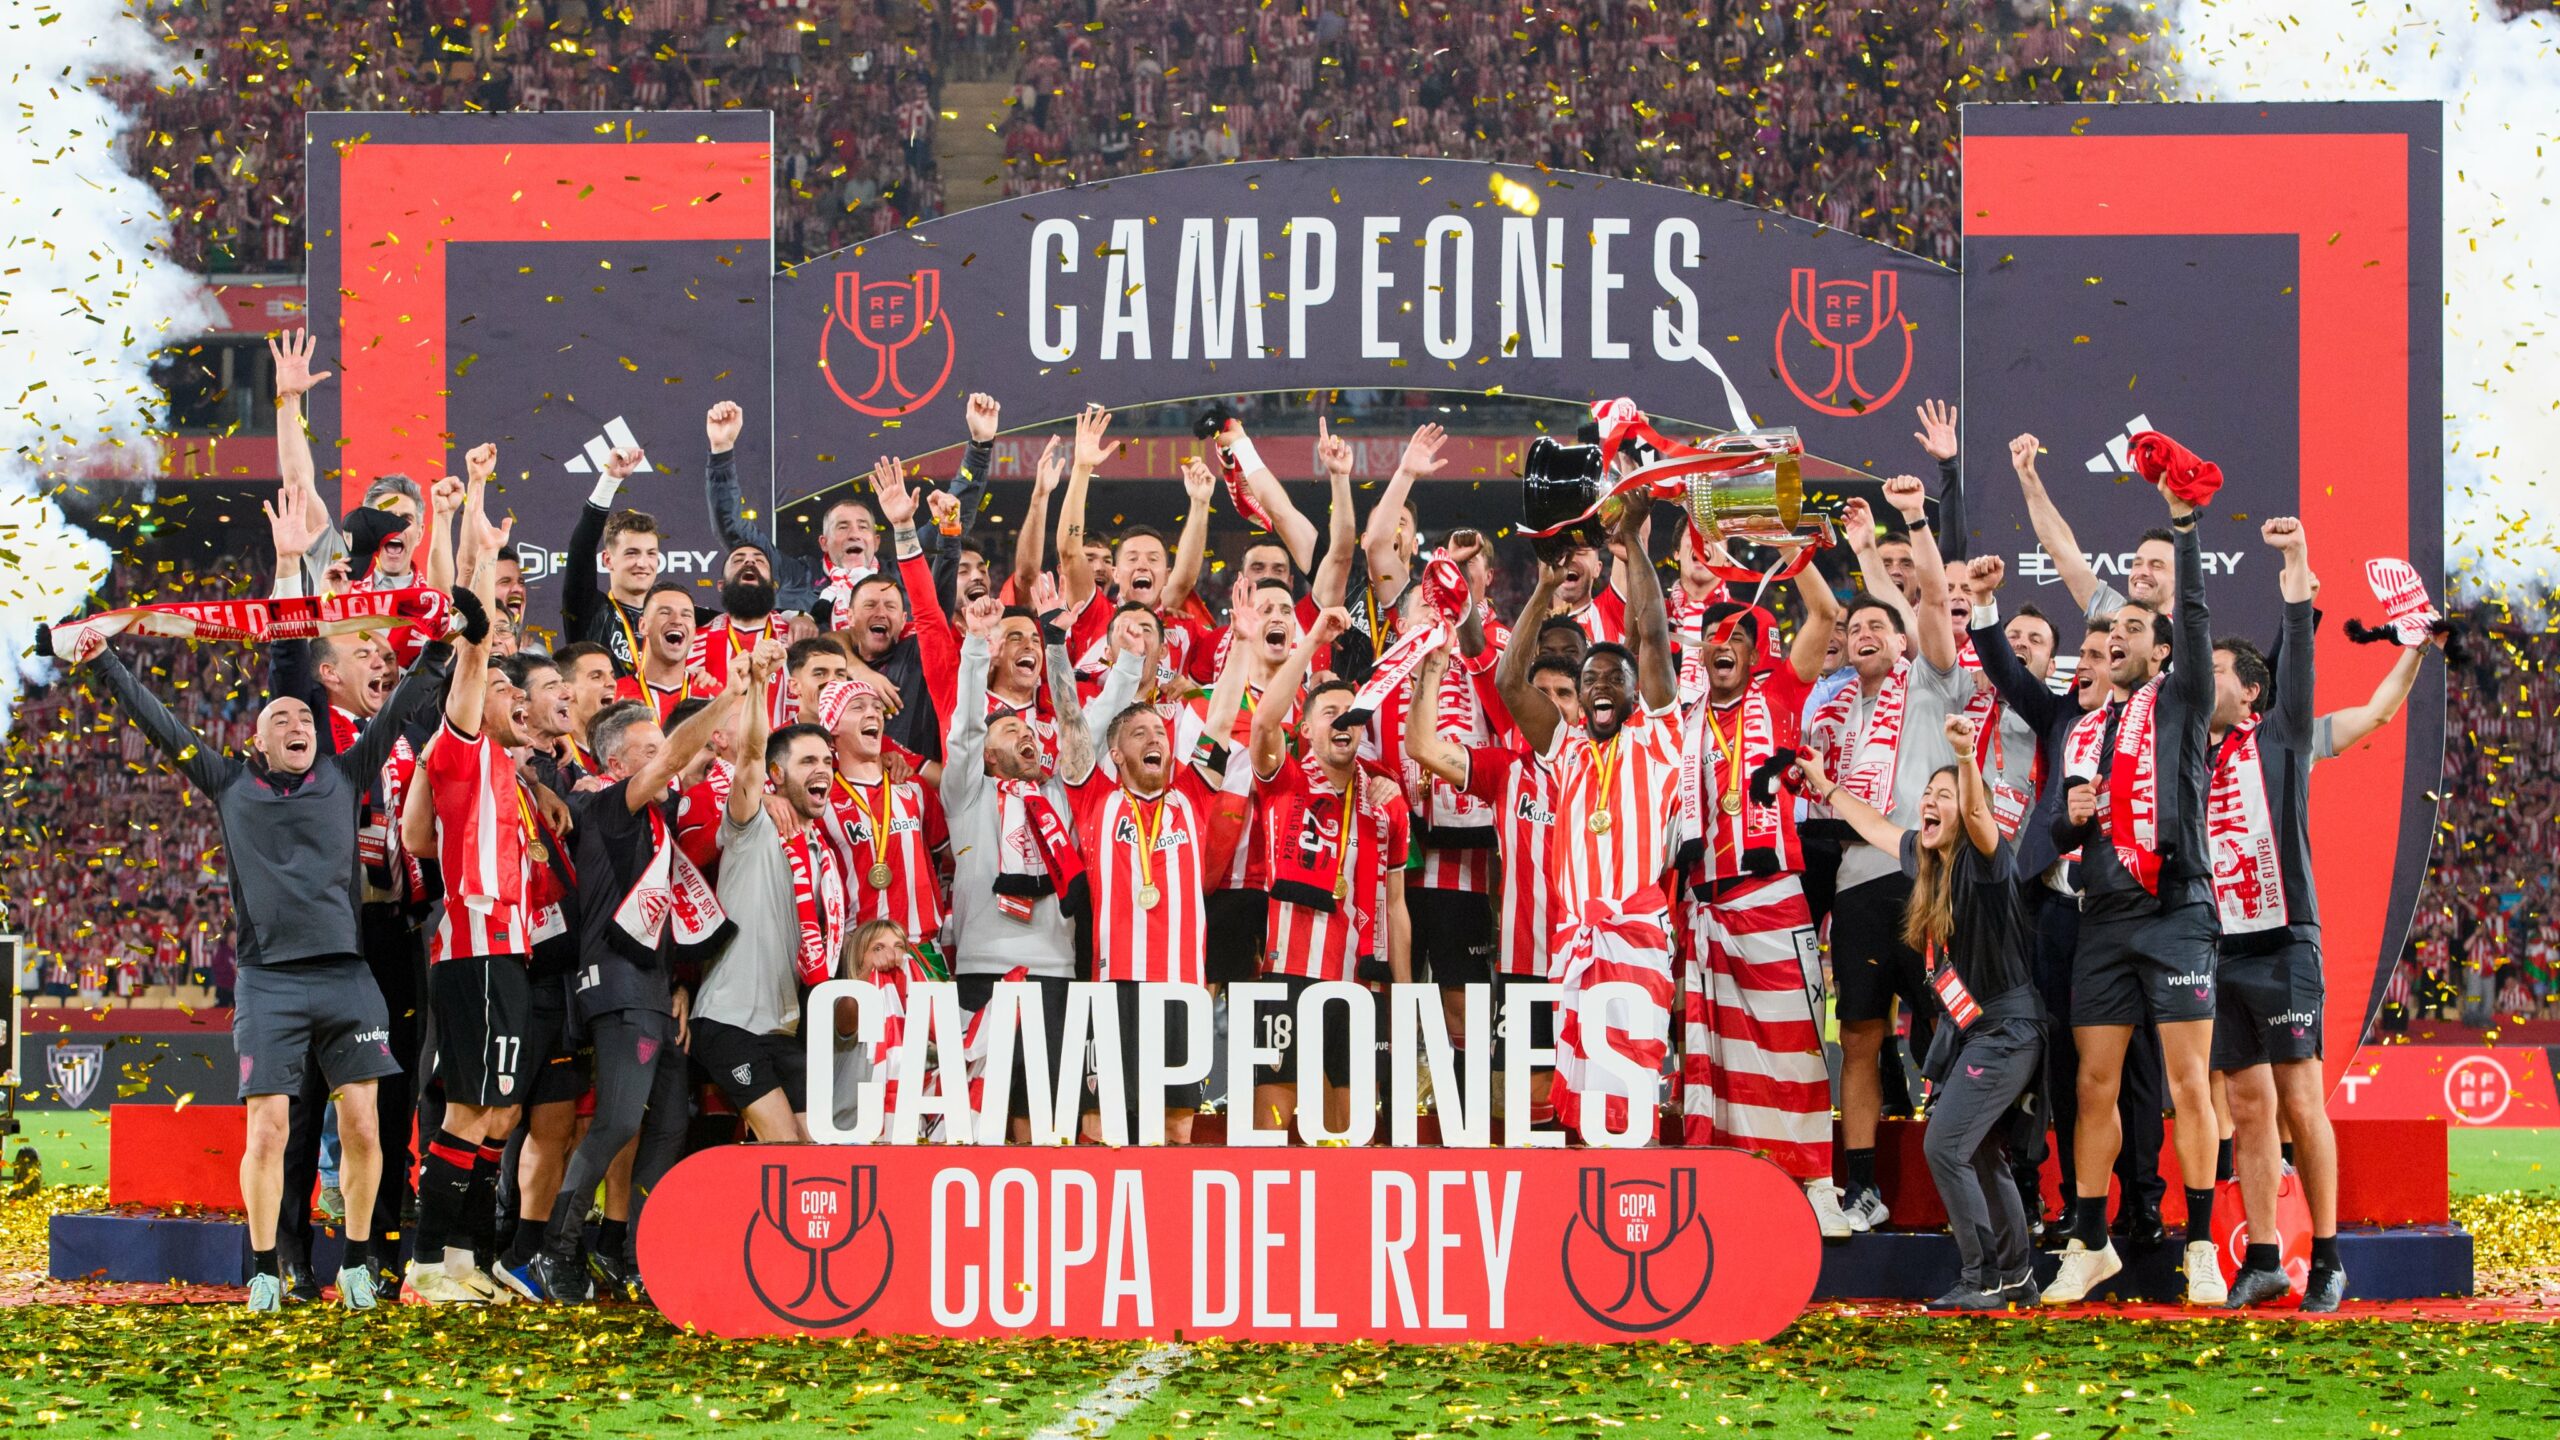 A forty year trophy wait ended in Seville for Bilbao